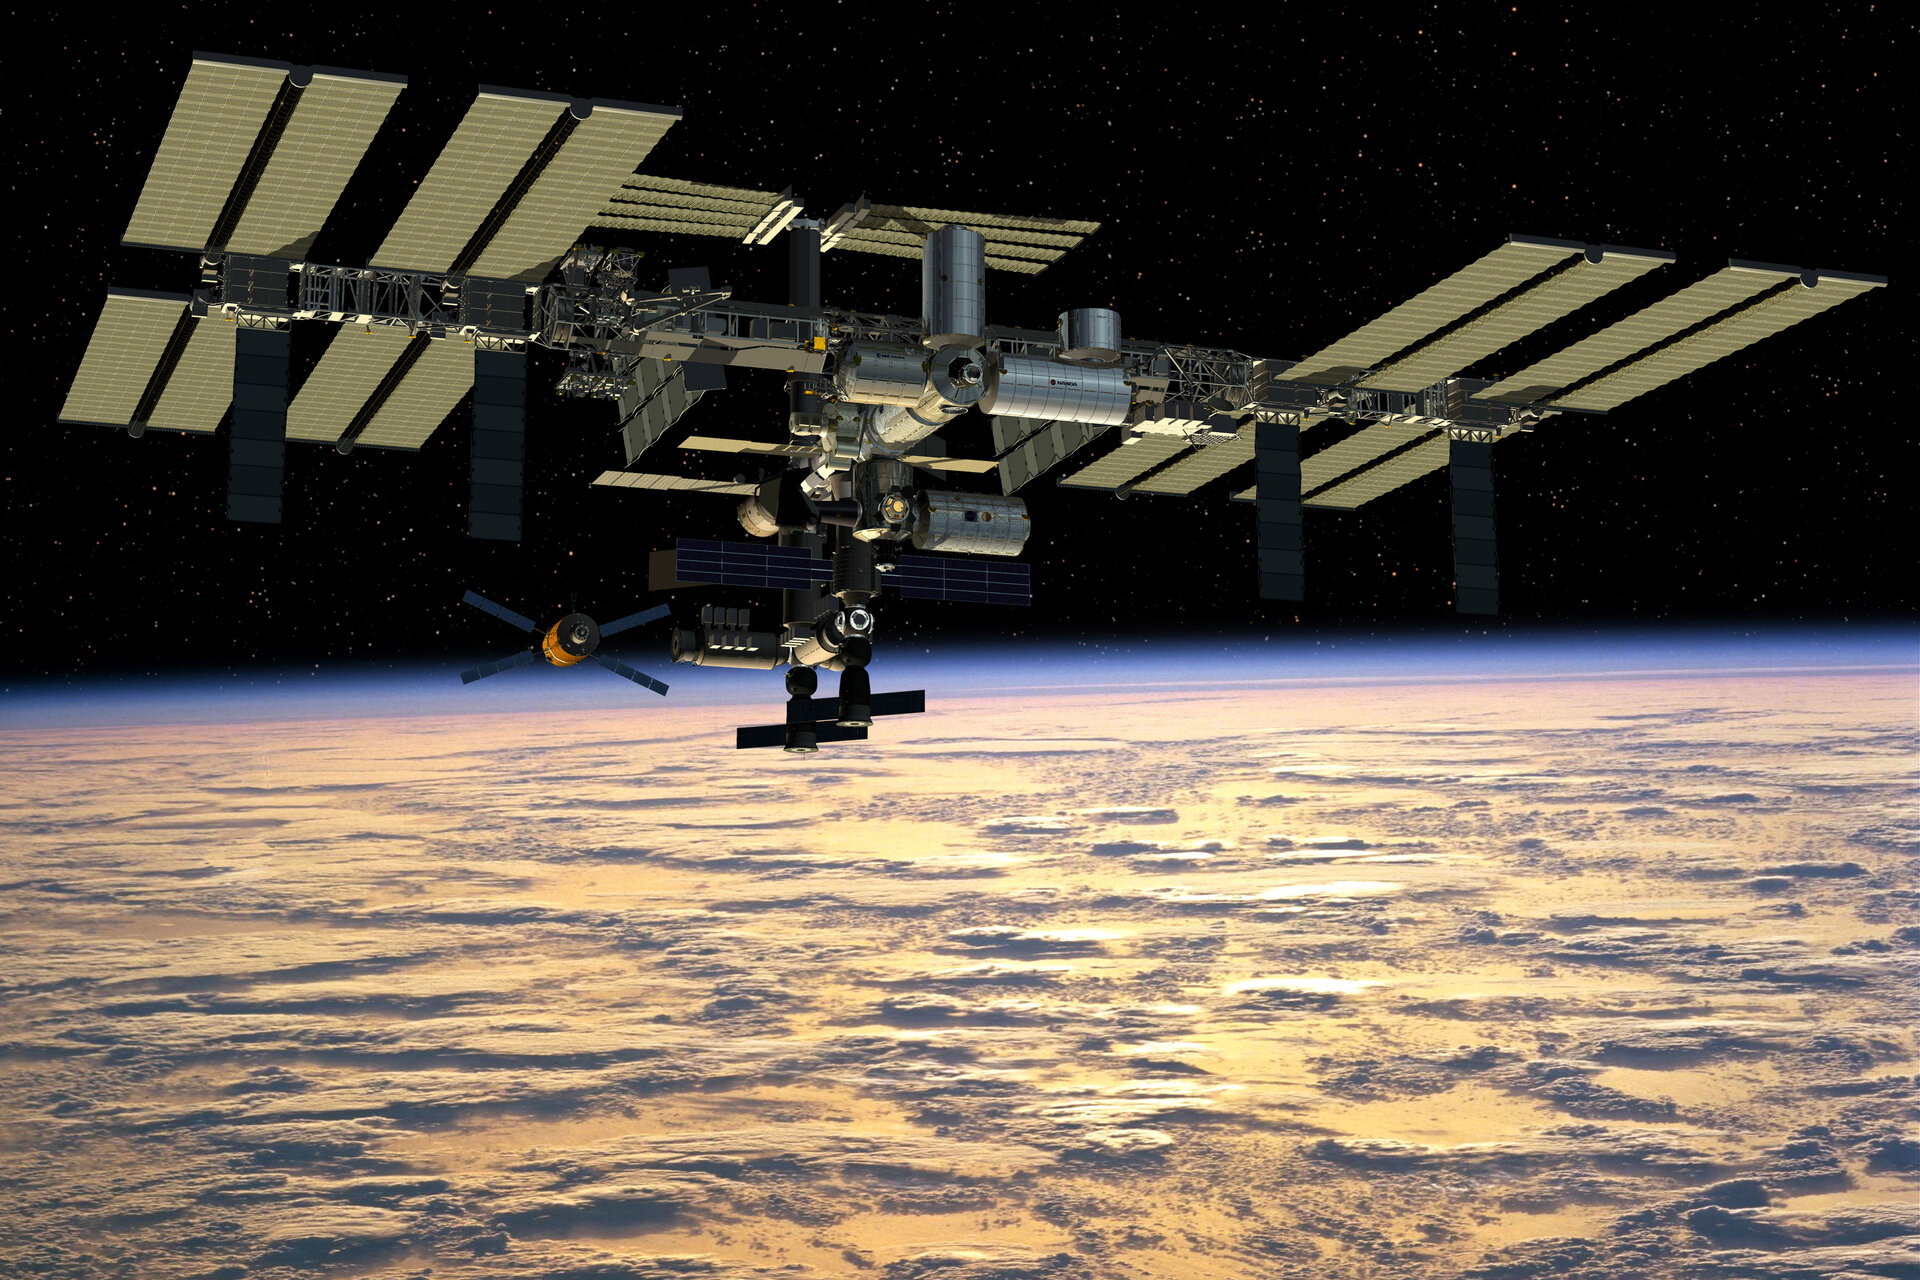 Artist's impression of the completed International Space Station